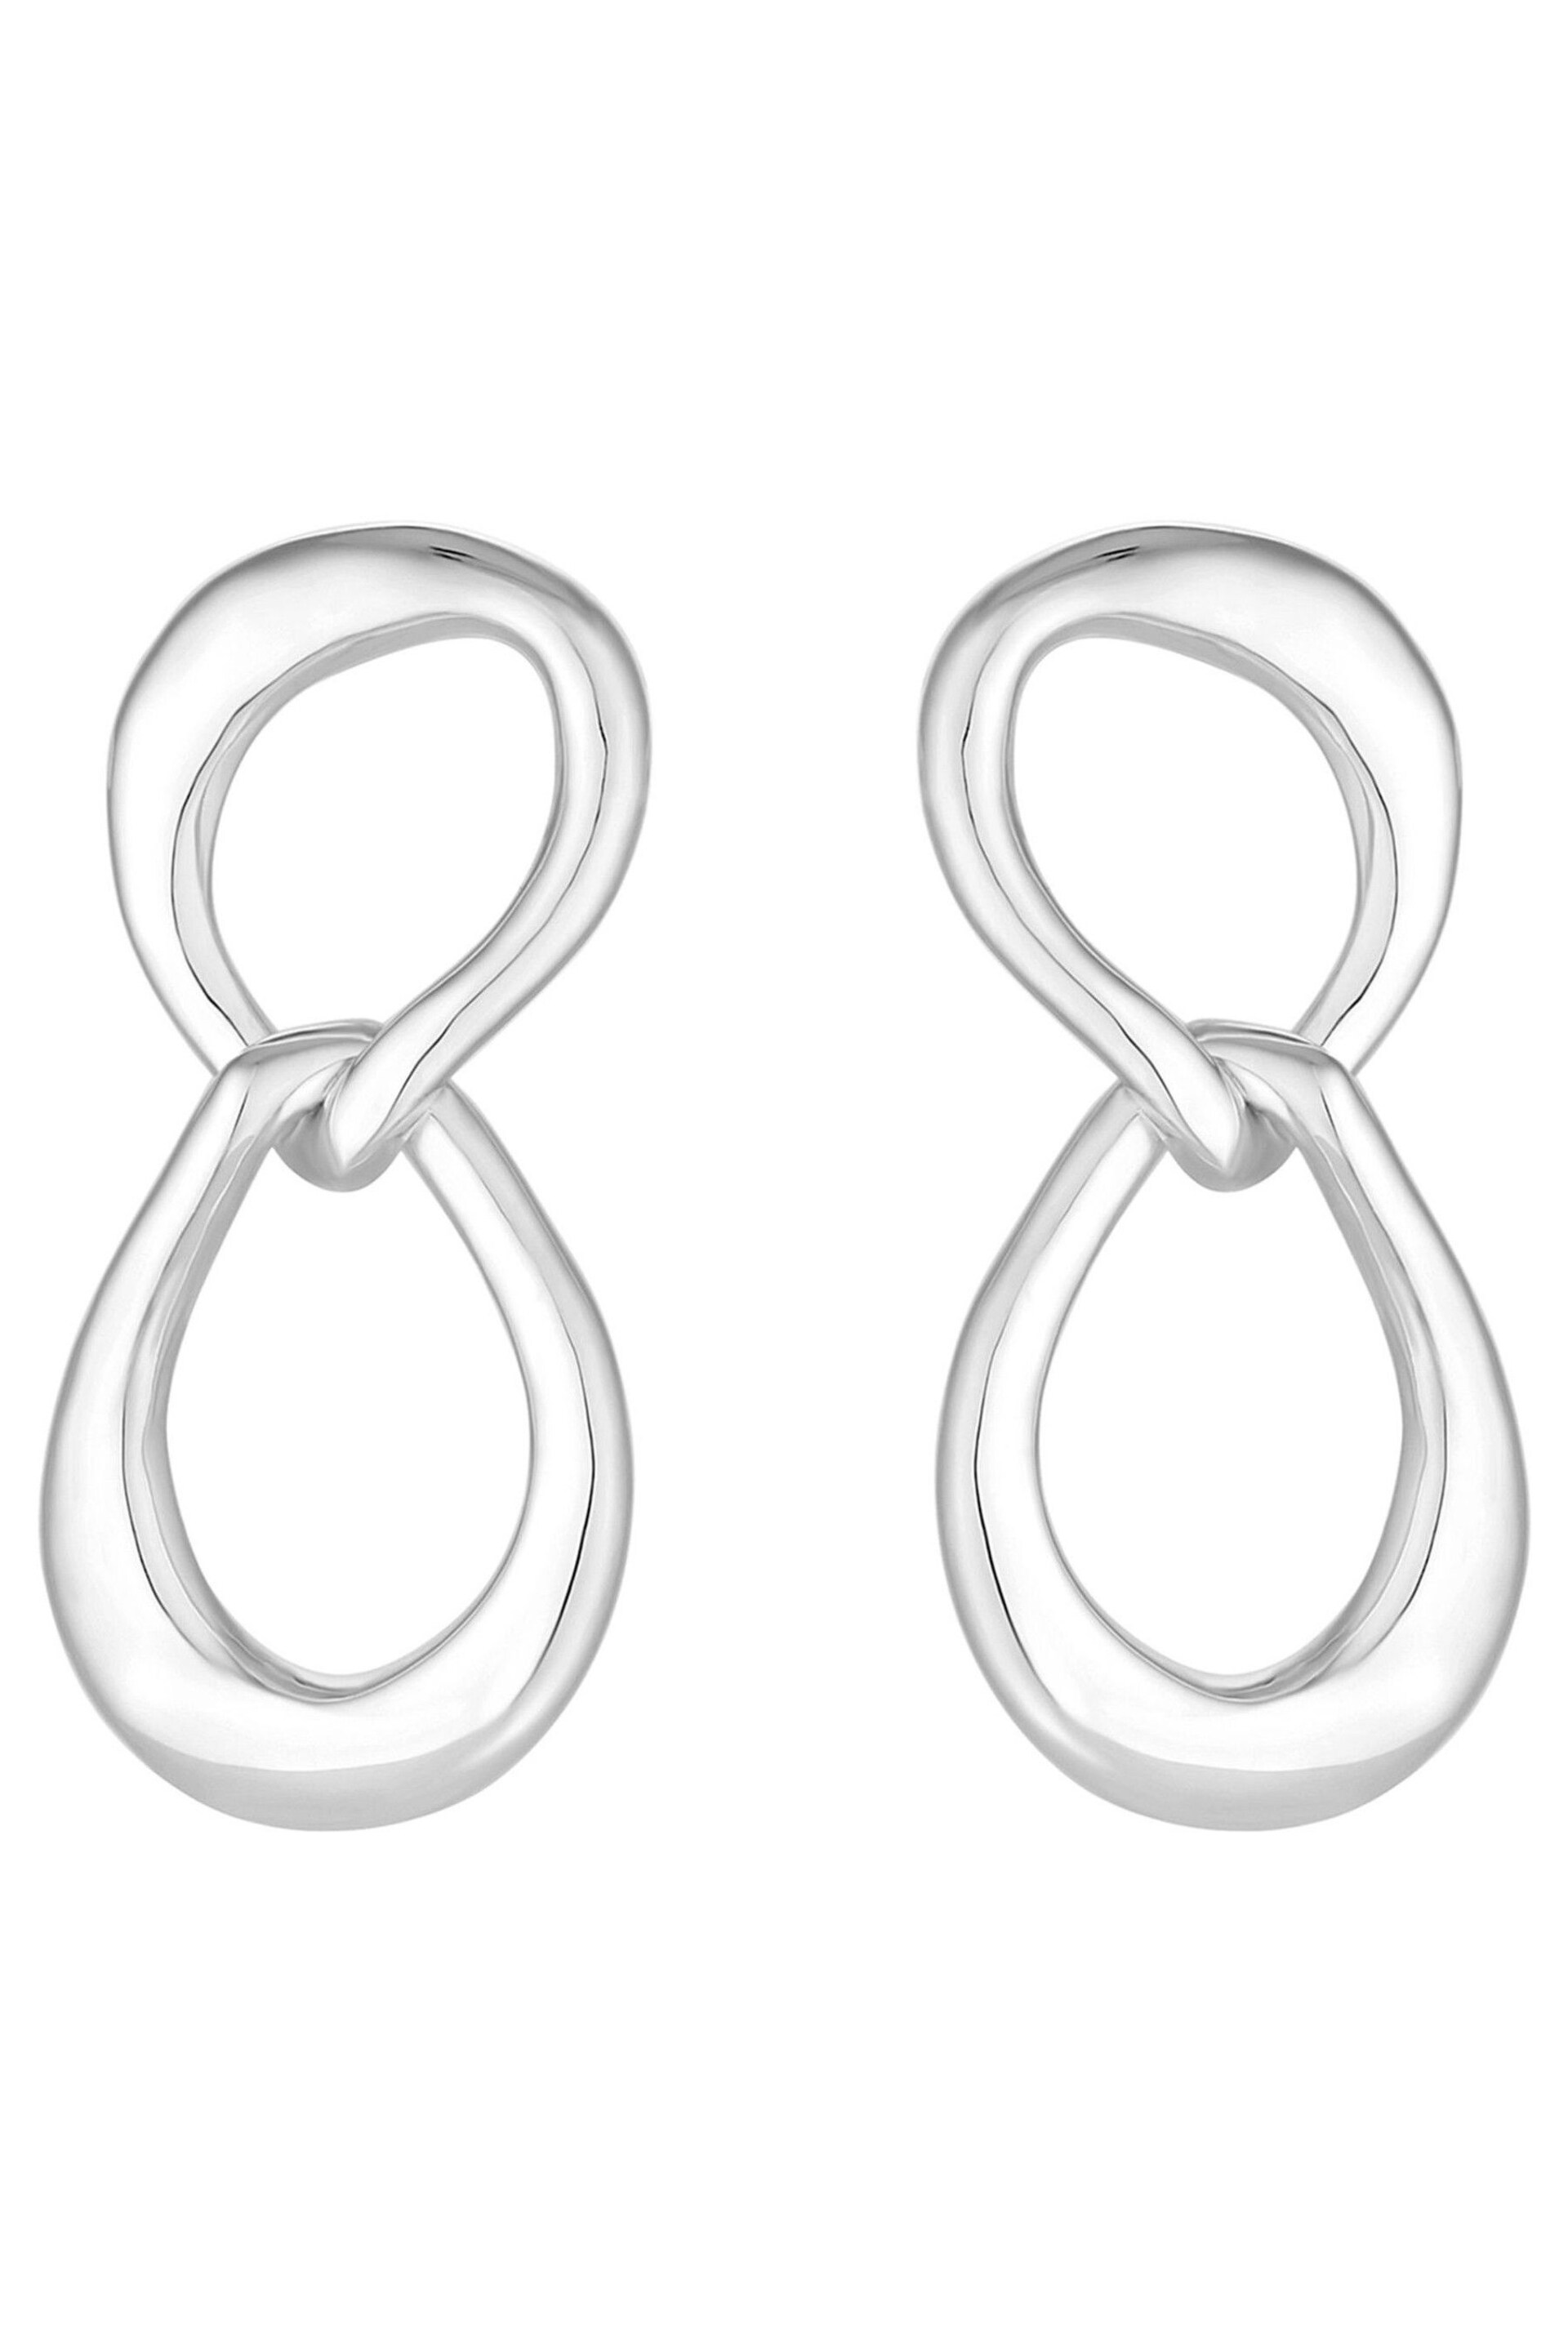 Simply Silver Silver Tone Polished Oval Link Drop Earrings - Image 1 of 3